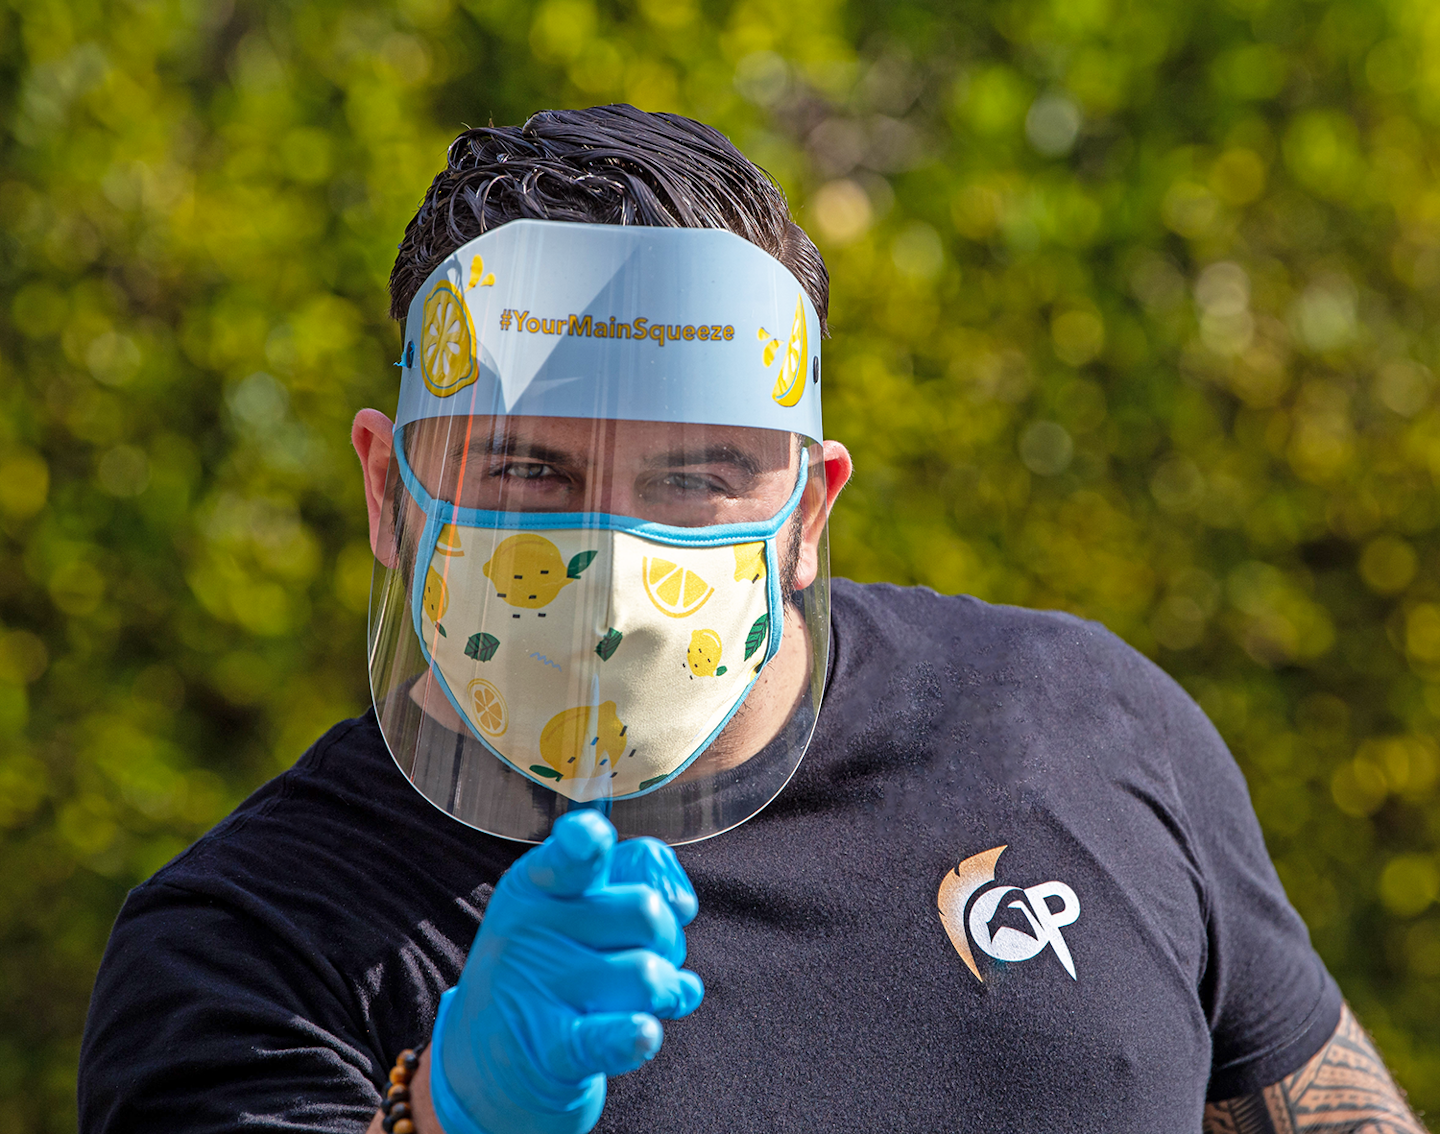 The team used branded PPE to keep staffers safe without sacrificing the activation's bright and colorful theme.